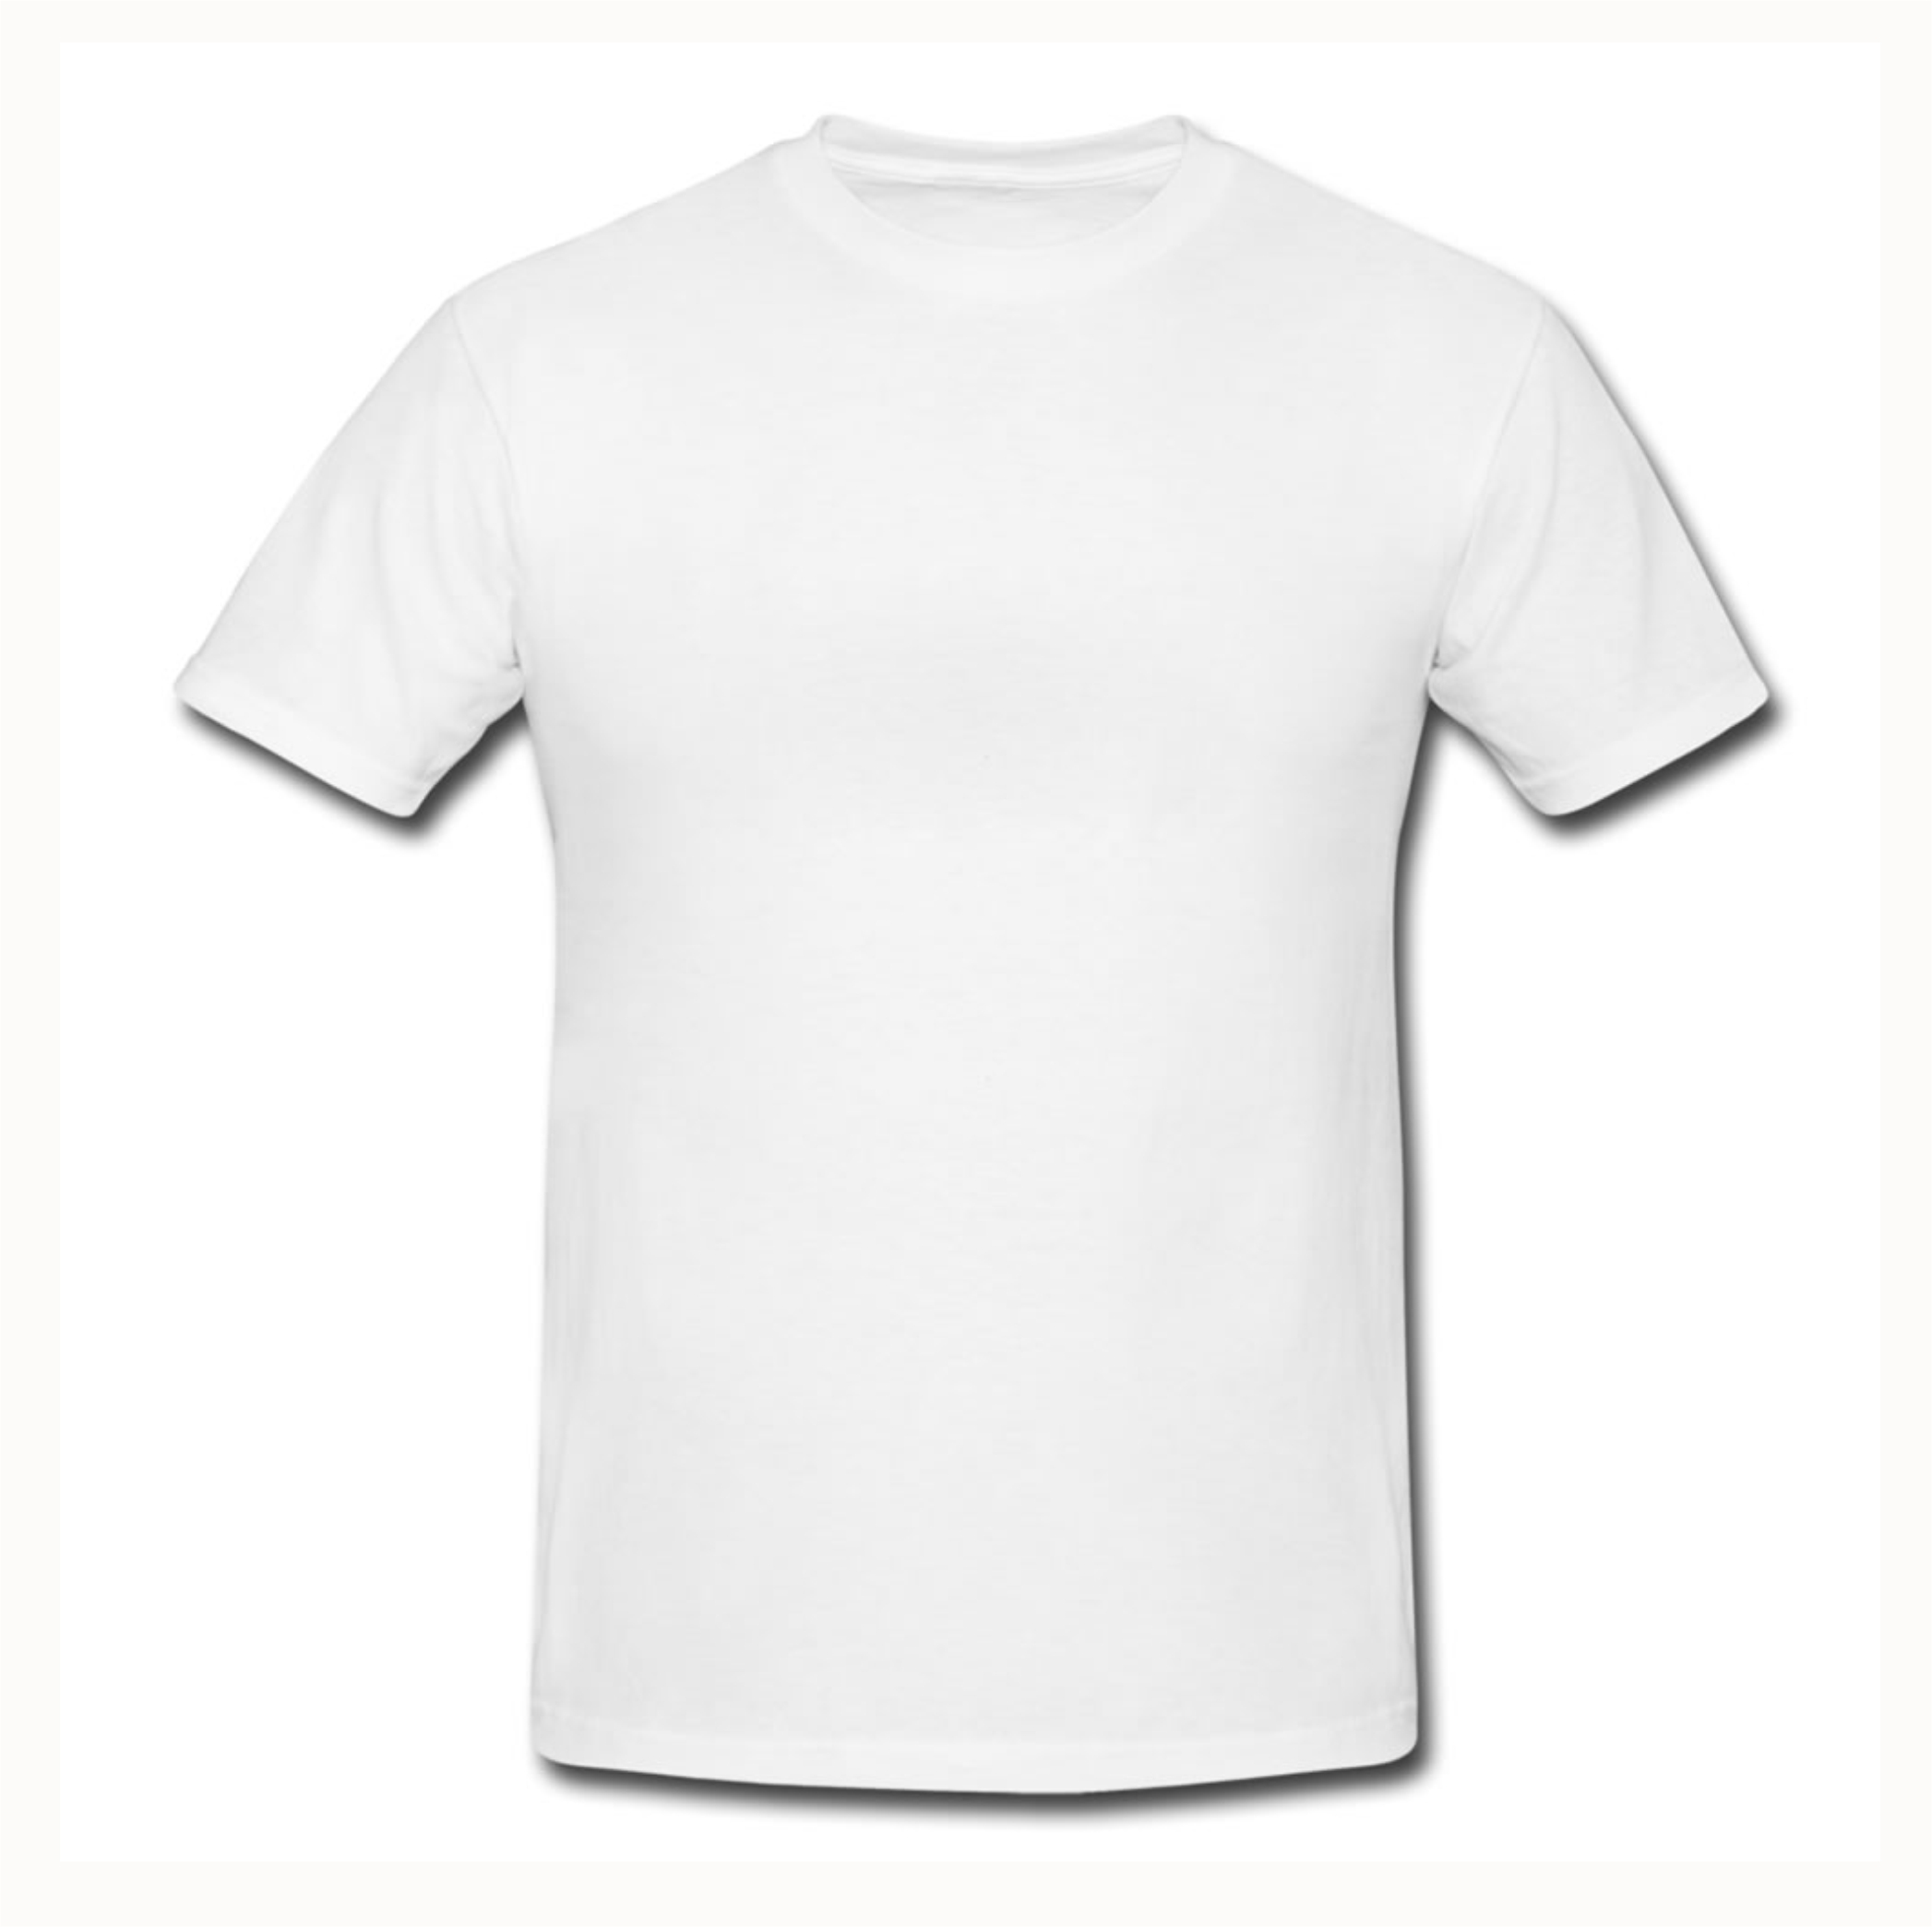 Blank White T Shirt : Rated: The 20 Best White T-Shirts on Amazon | Who What Wear - Jackson Jakfam46